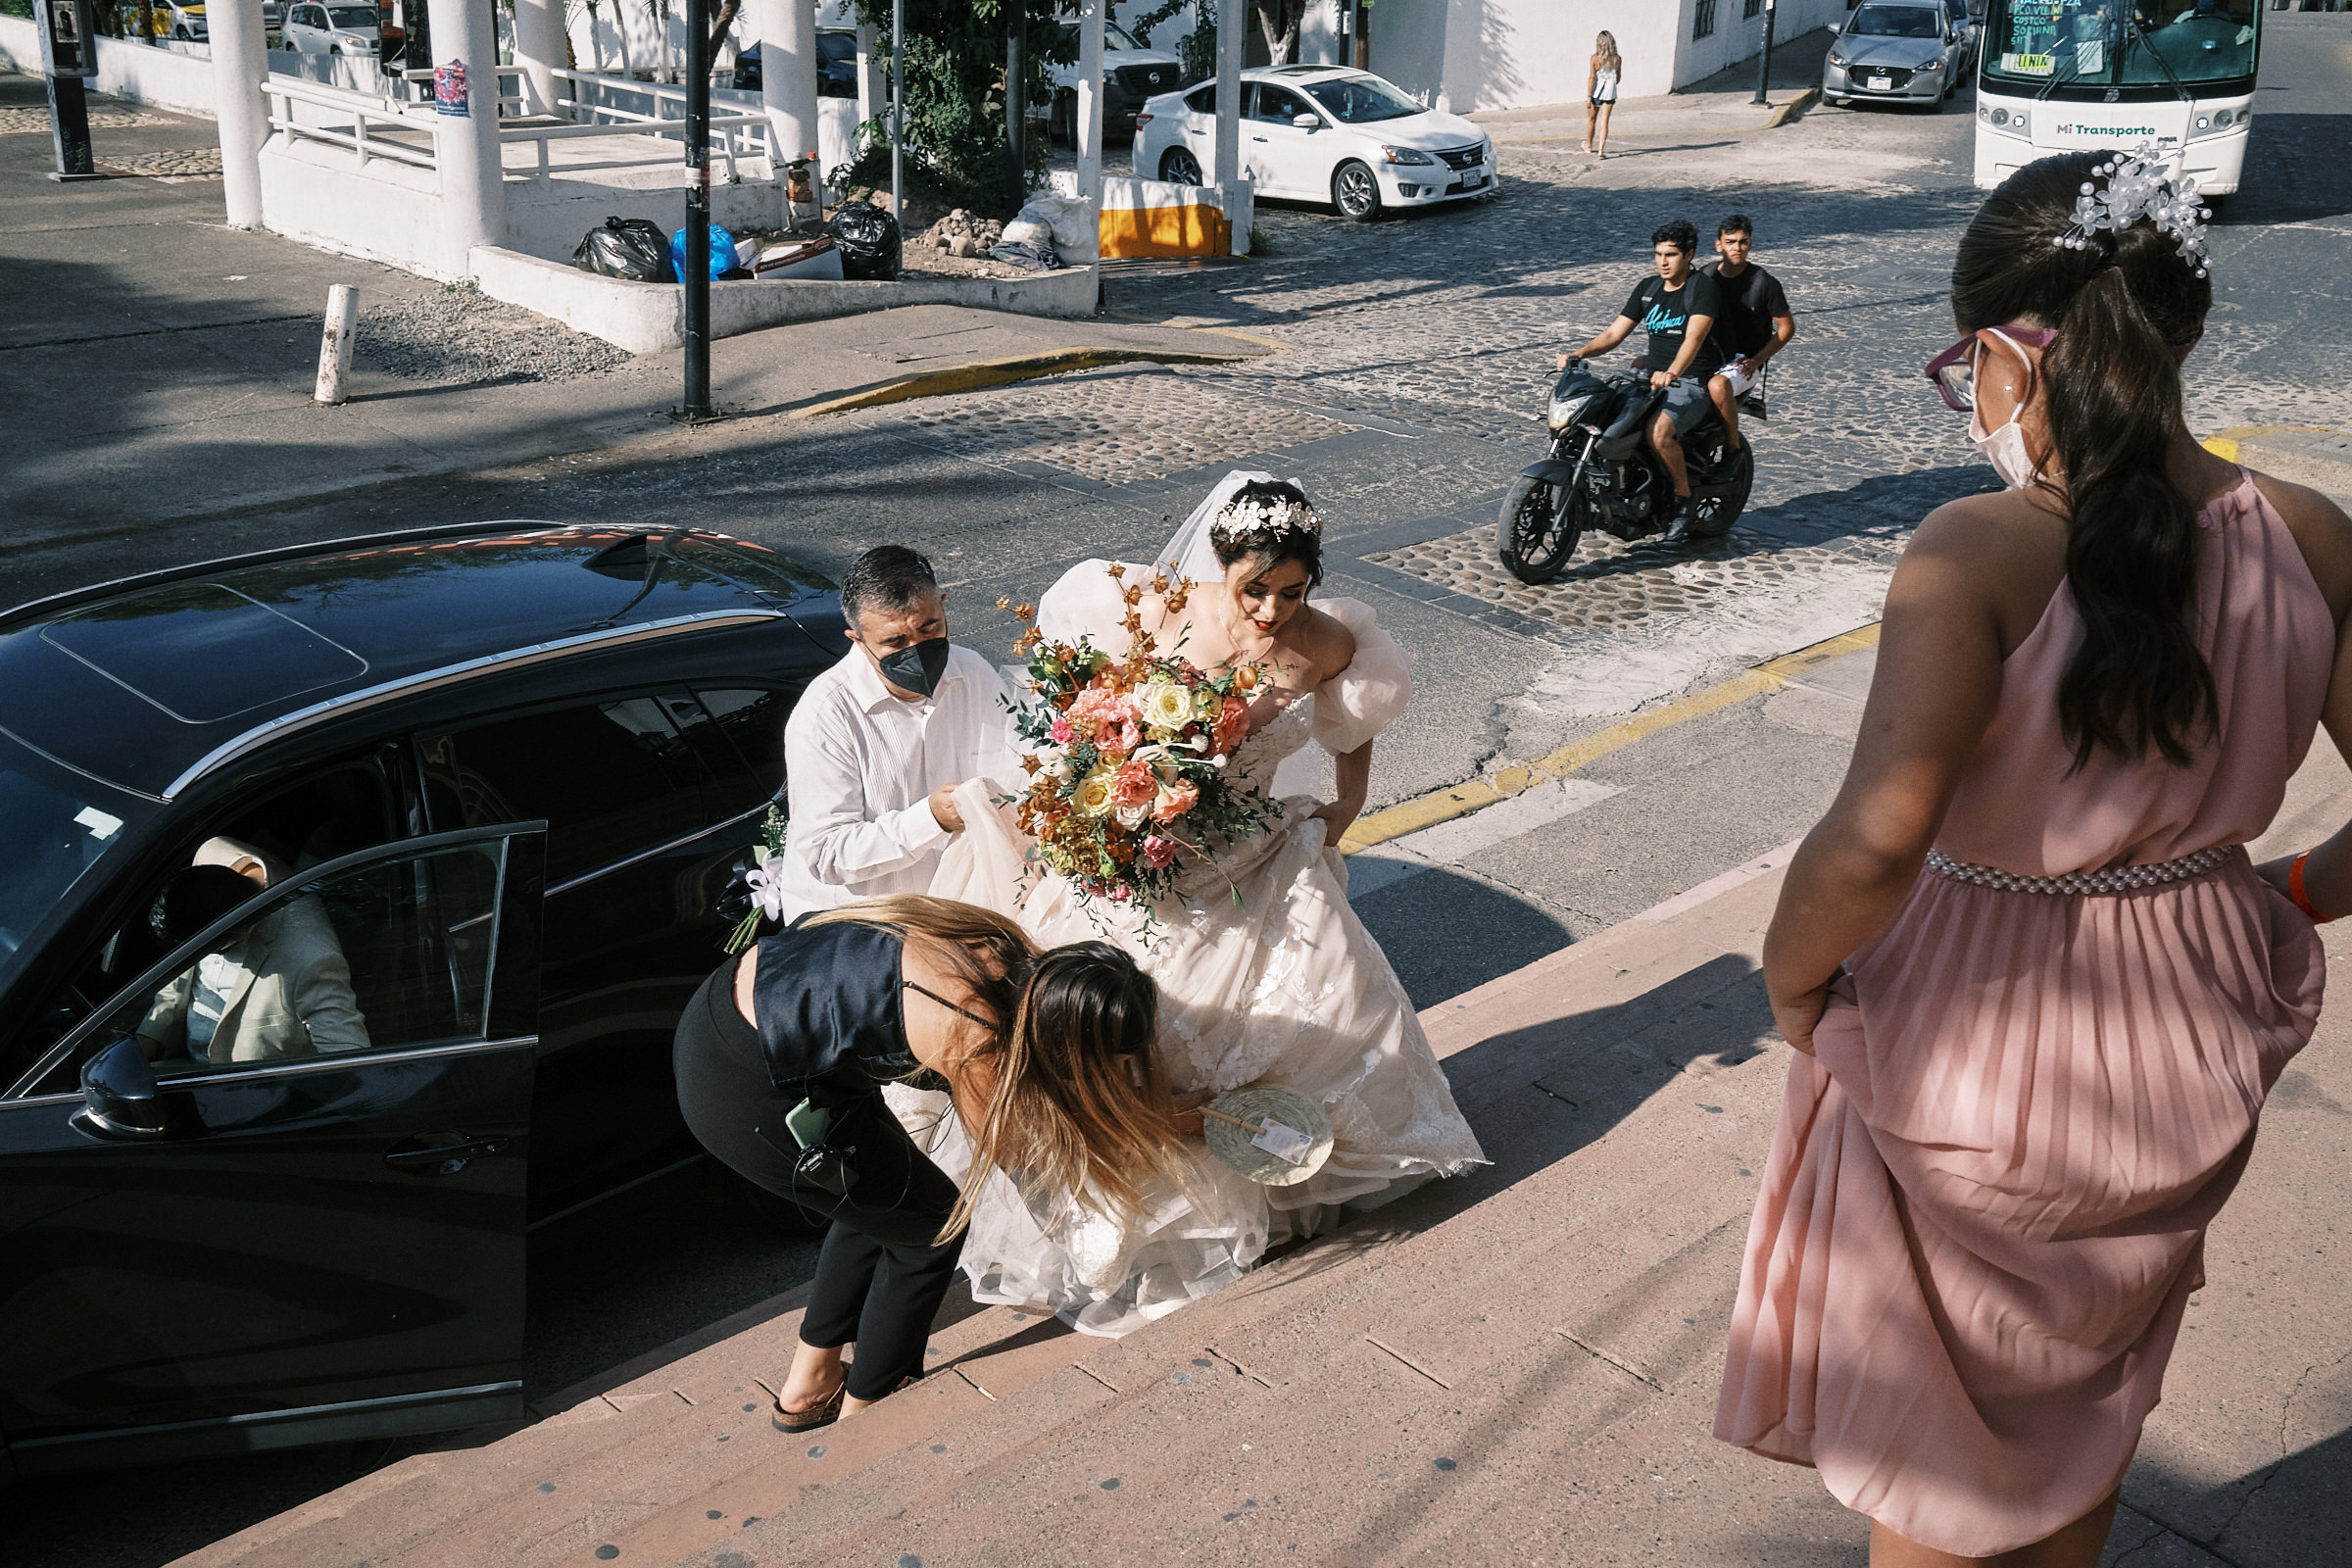 Bride Gets Down Of The Car And Arrives The Wedding Ceremony Location